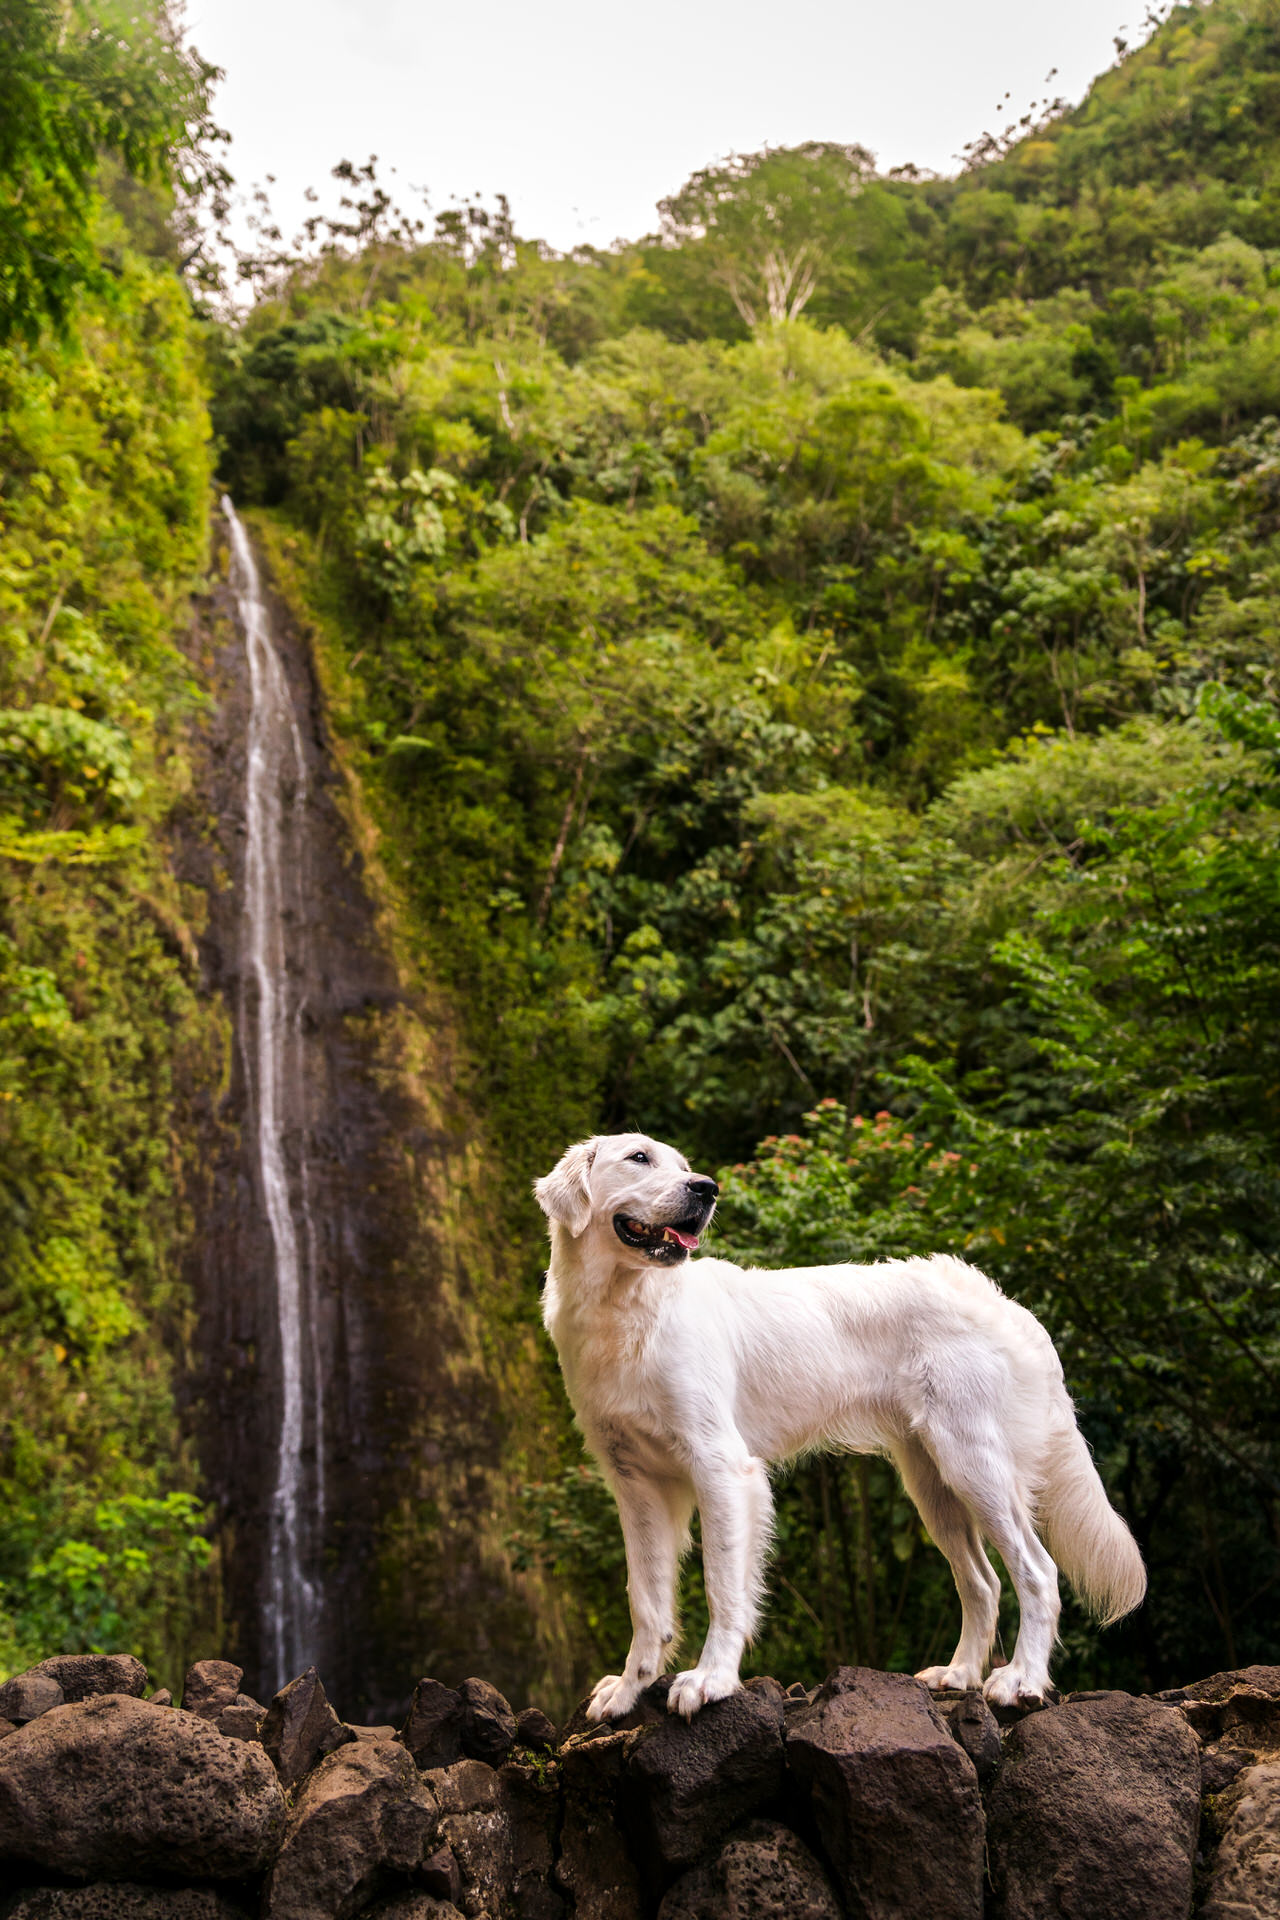 White dog standing by waterfall in lush forest.